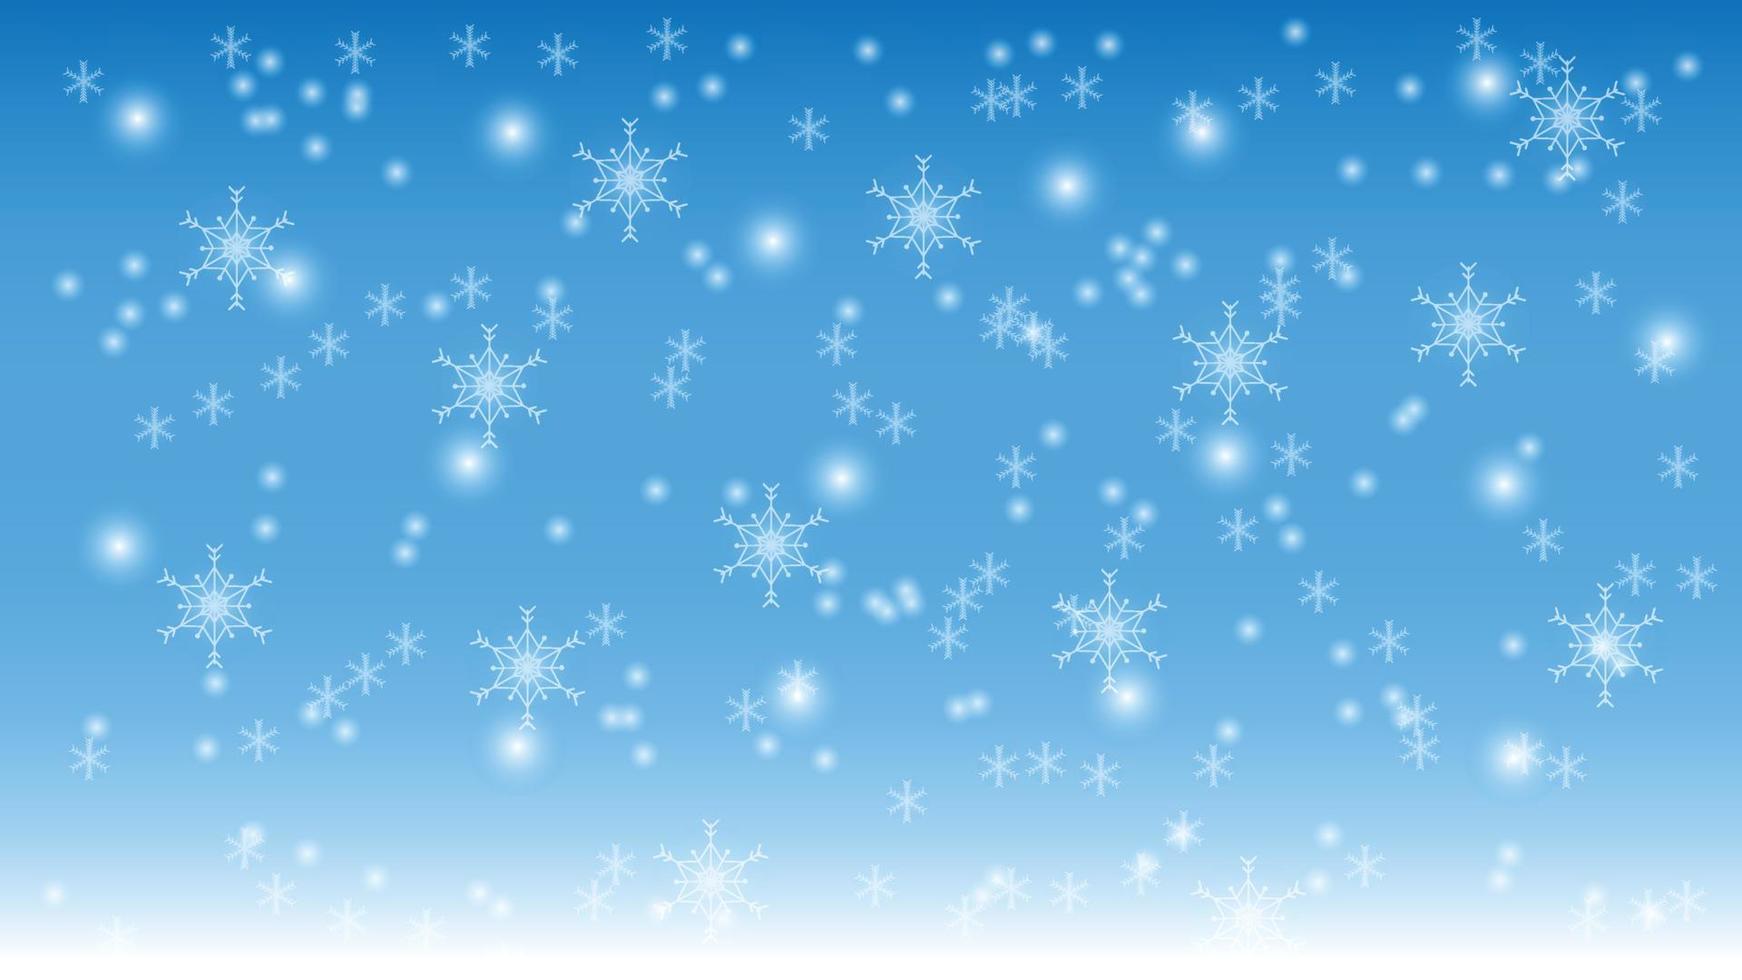 Beautiful snowfall and star blur winter blue background vector